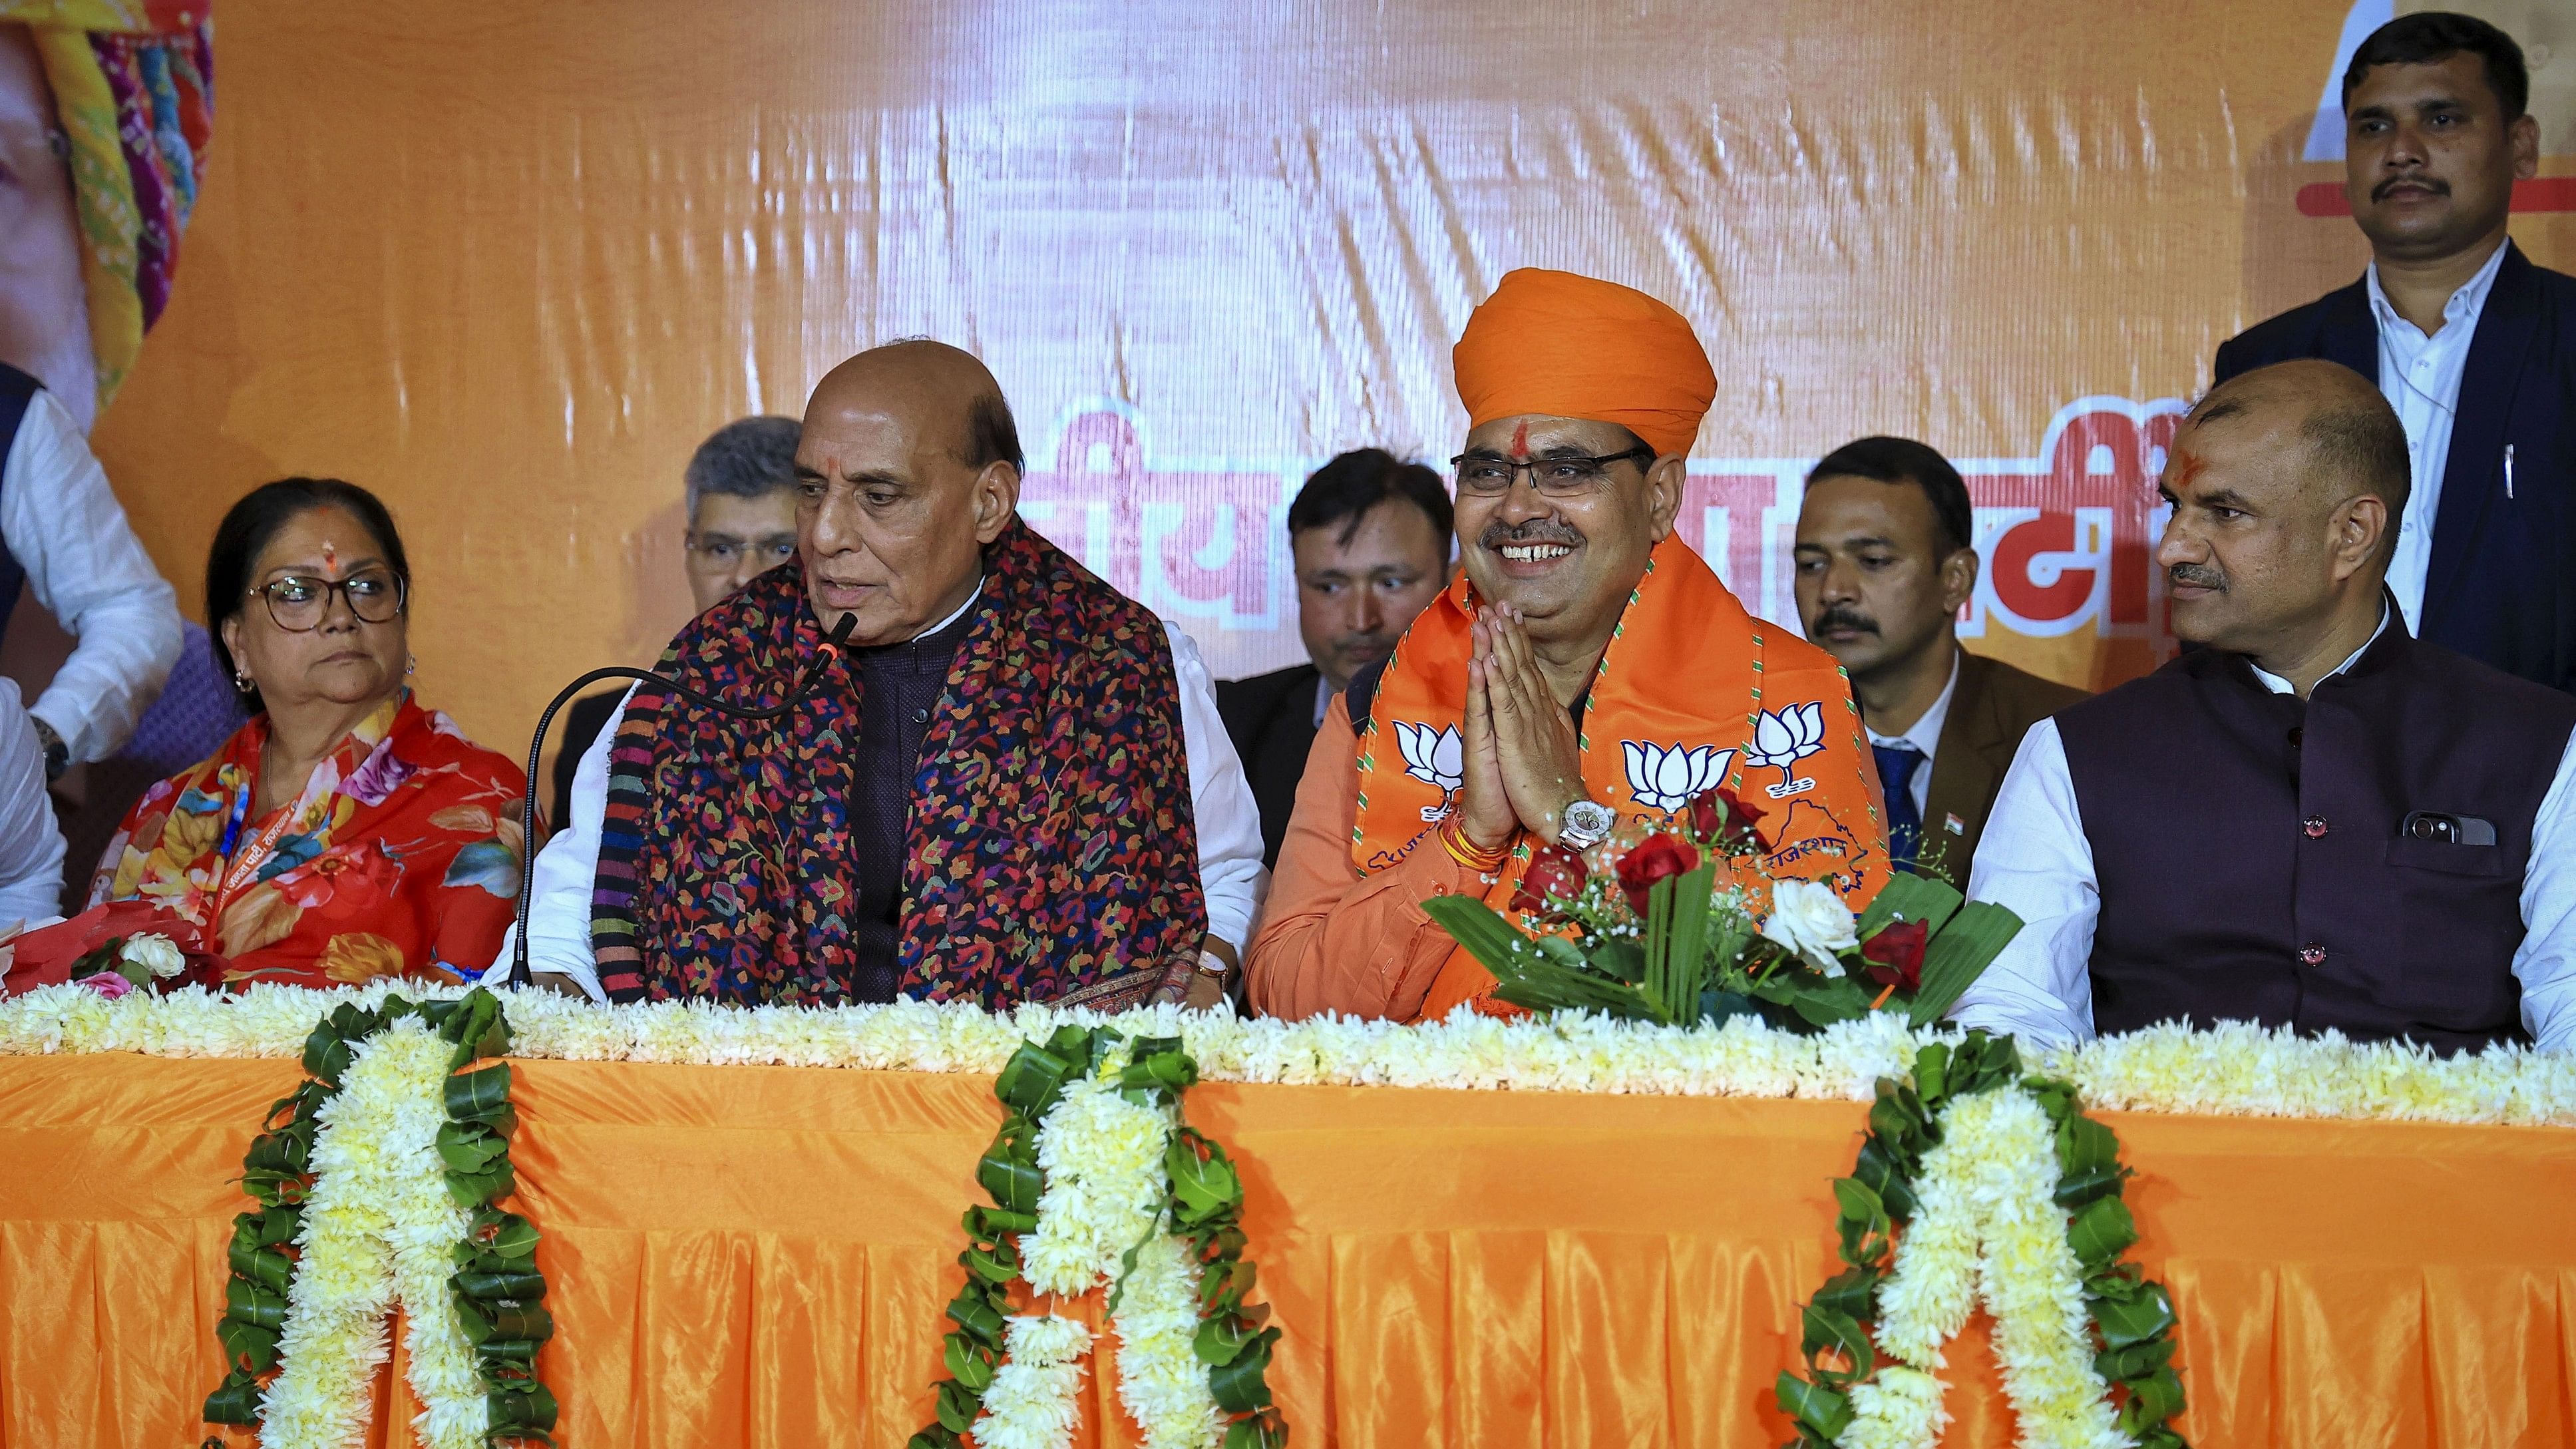 <div class="paragraphs"><p>Defence Minister and BJP central observer for Rajasthan Rajnath Singh, Rajasthan BJP President CP Joshi, former Rajasthan CM Vasundhara Raje and newly-elected Rajasthan Chief Minister Bhajan Lal Sharma address the media during BJP Legislature Party meeting, in Jaipur.</p></div>